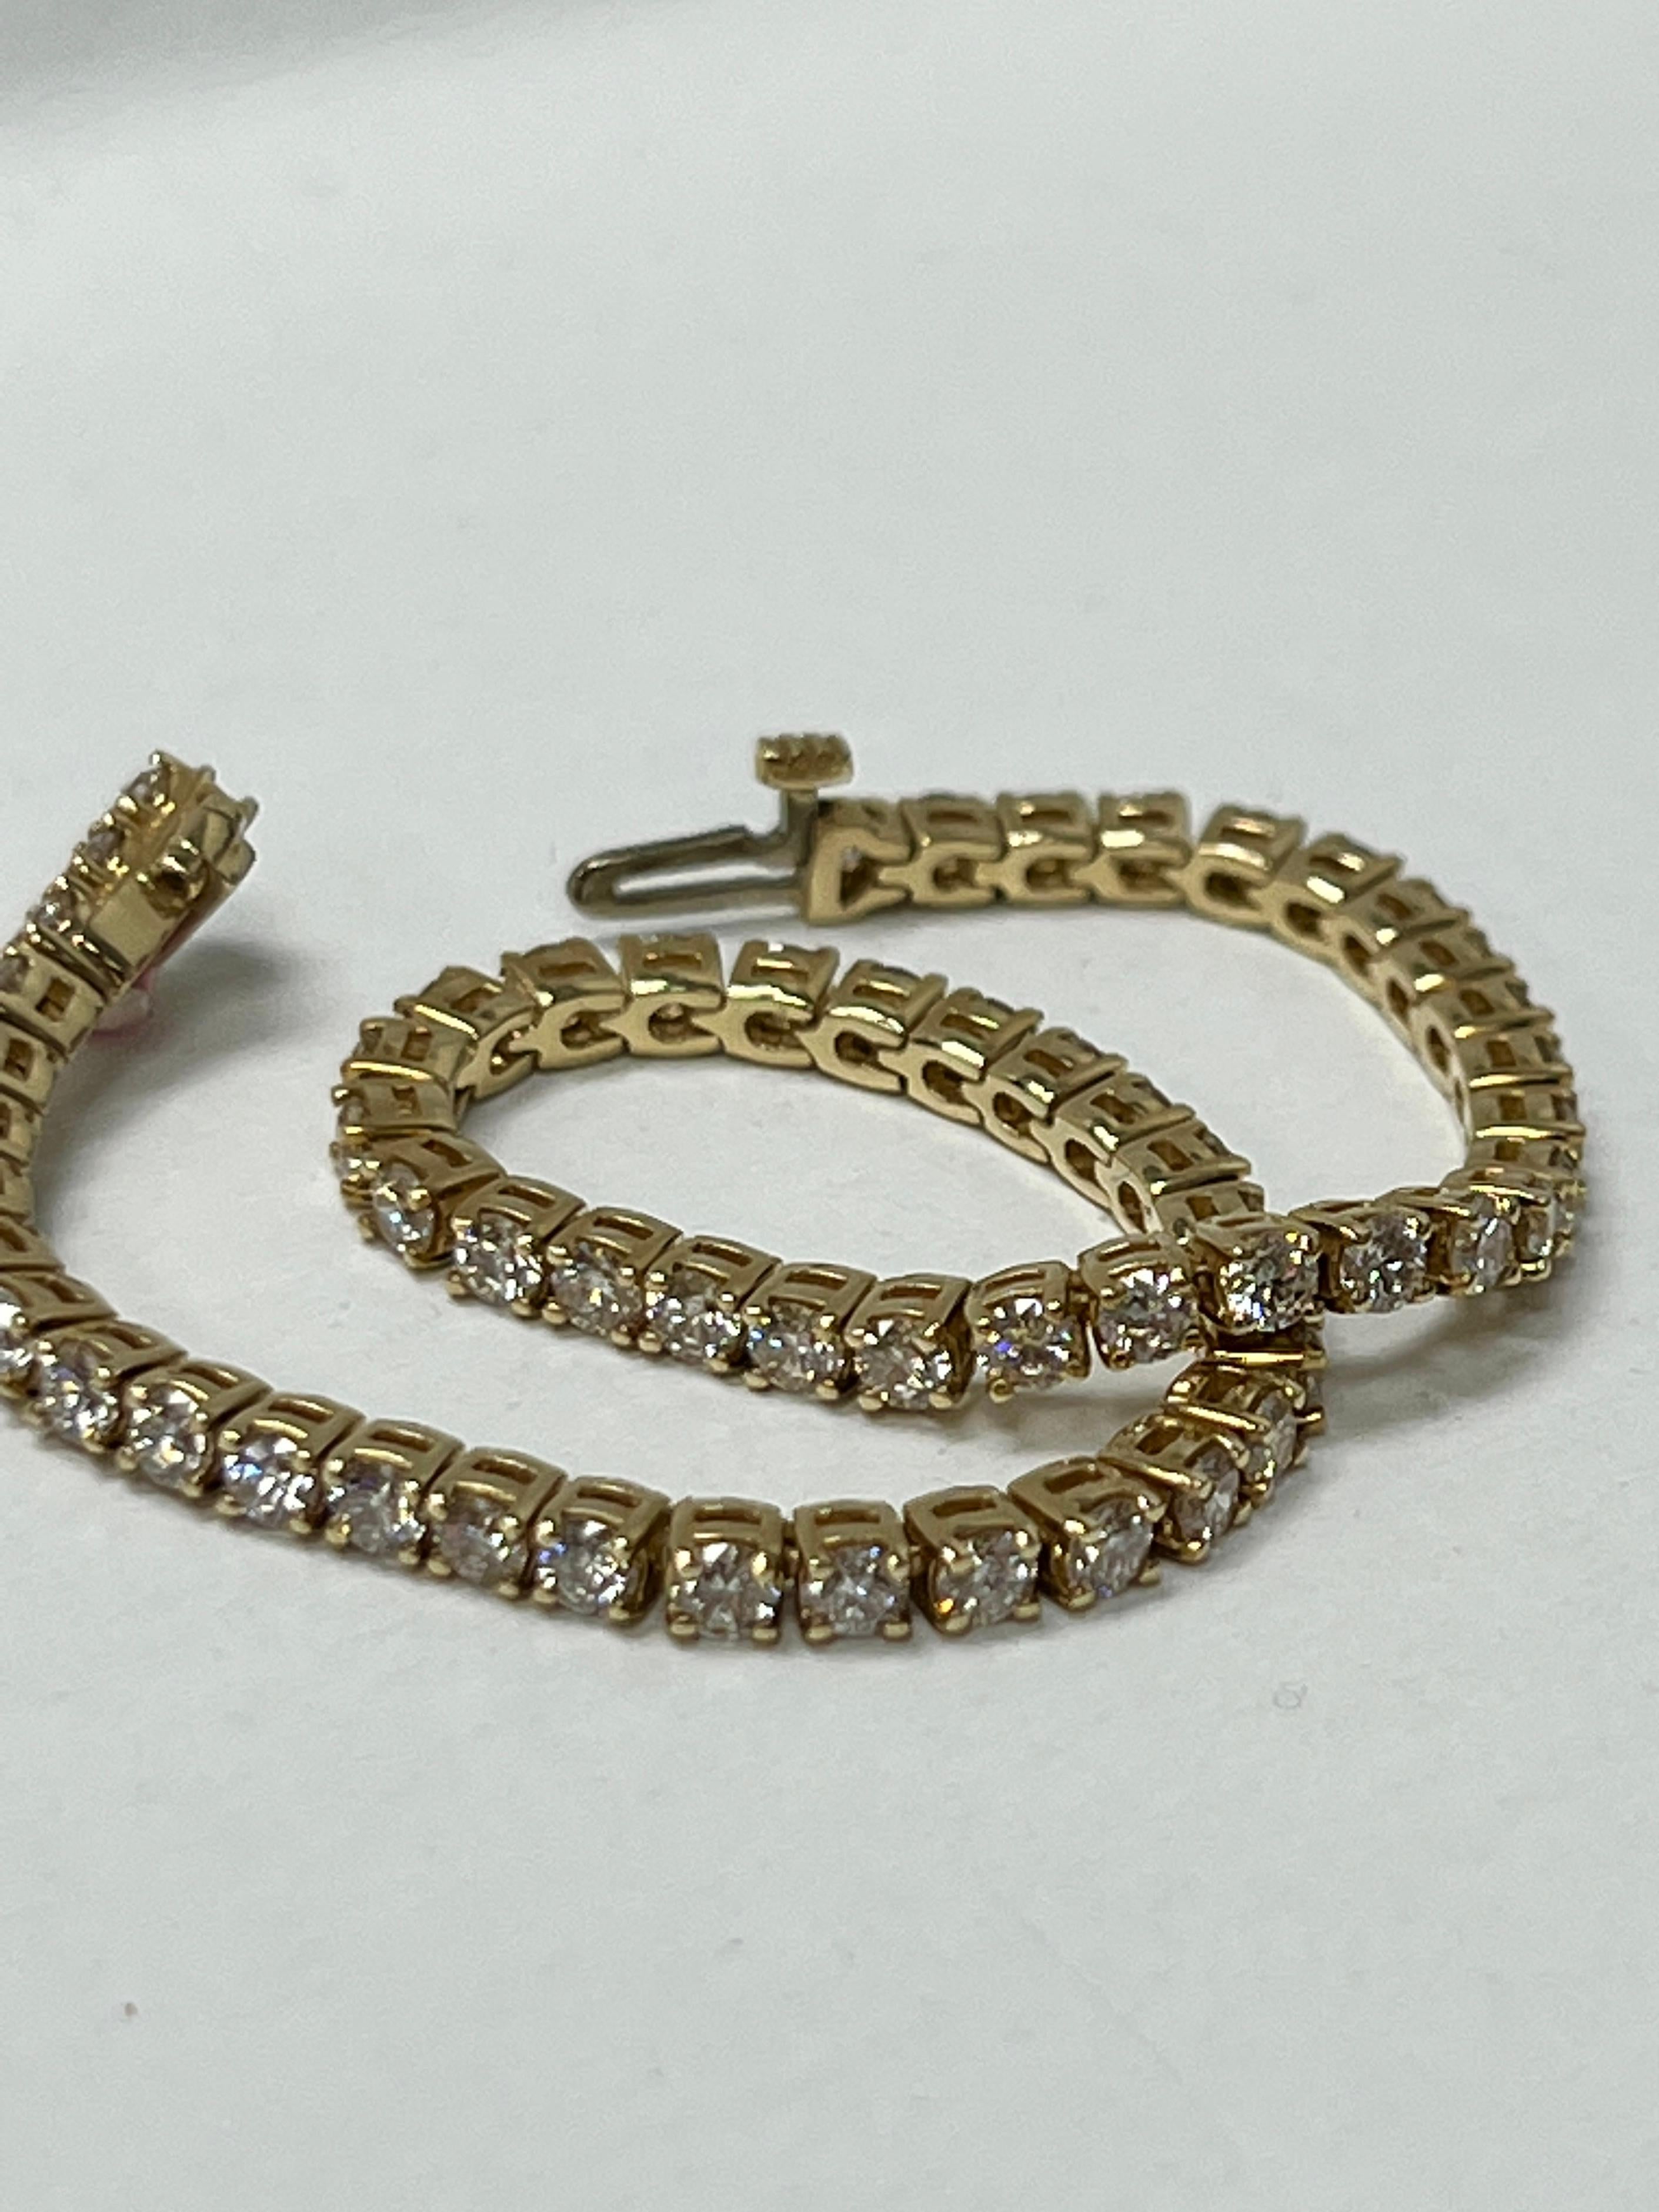 4 Carat Yellow Gold Diamond Bracelet In New Condition For Sale In Great Neck, NY